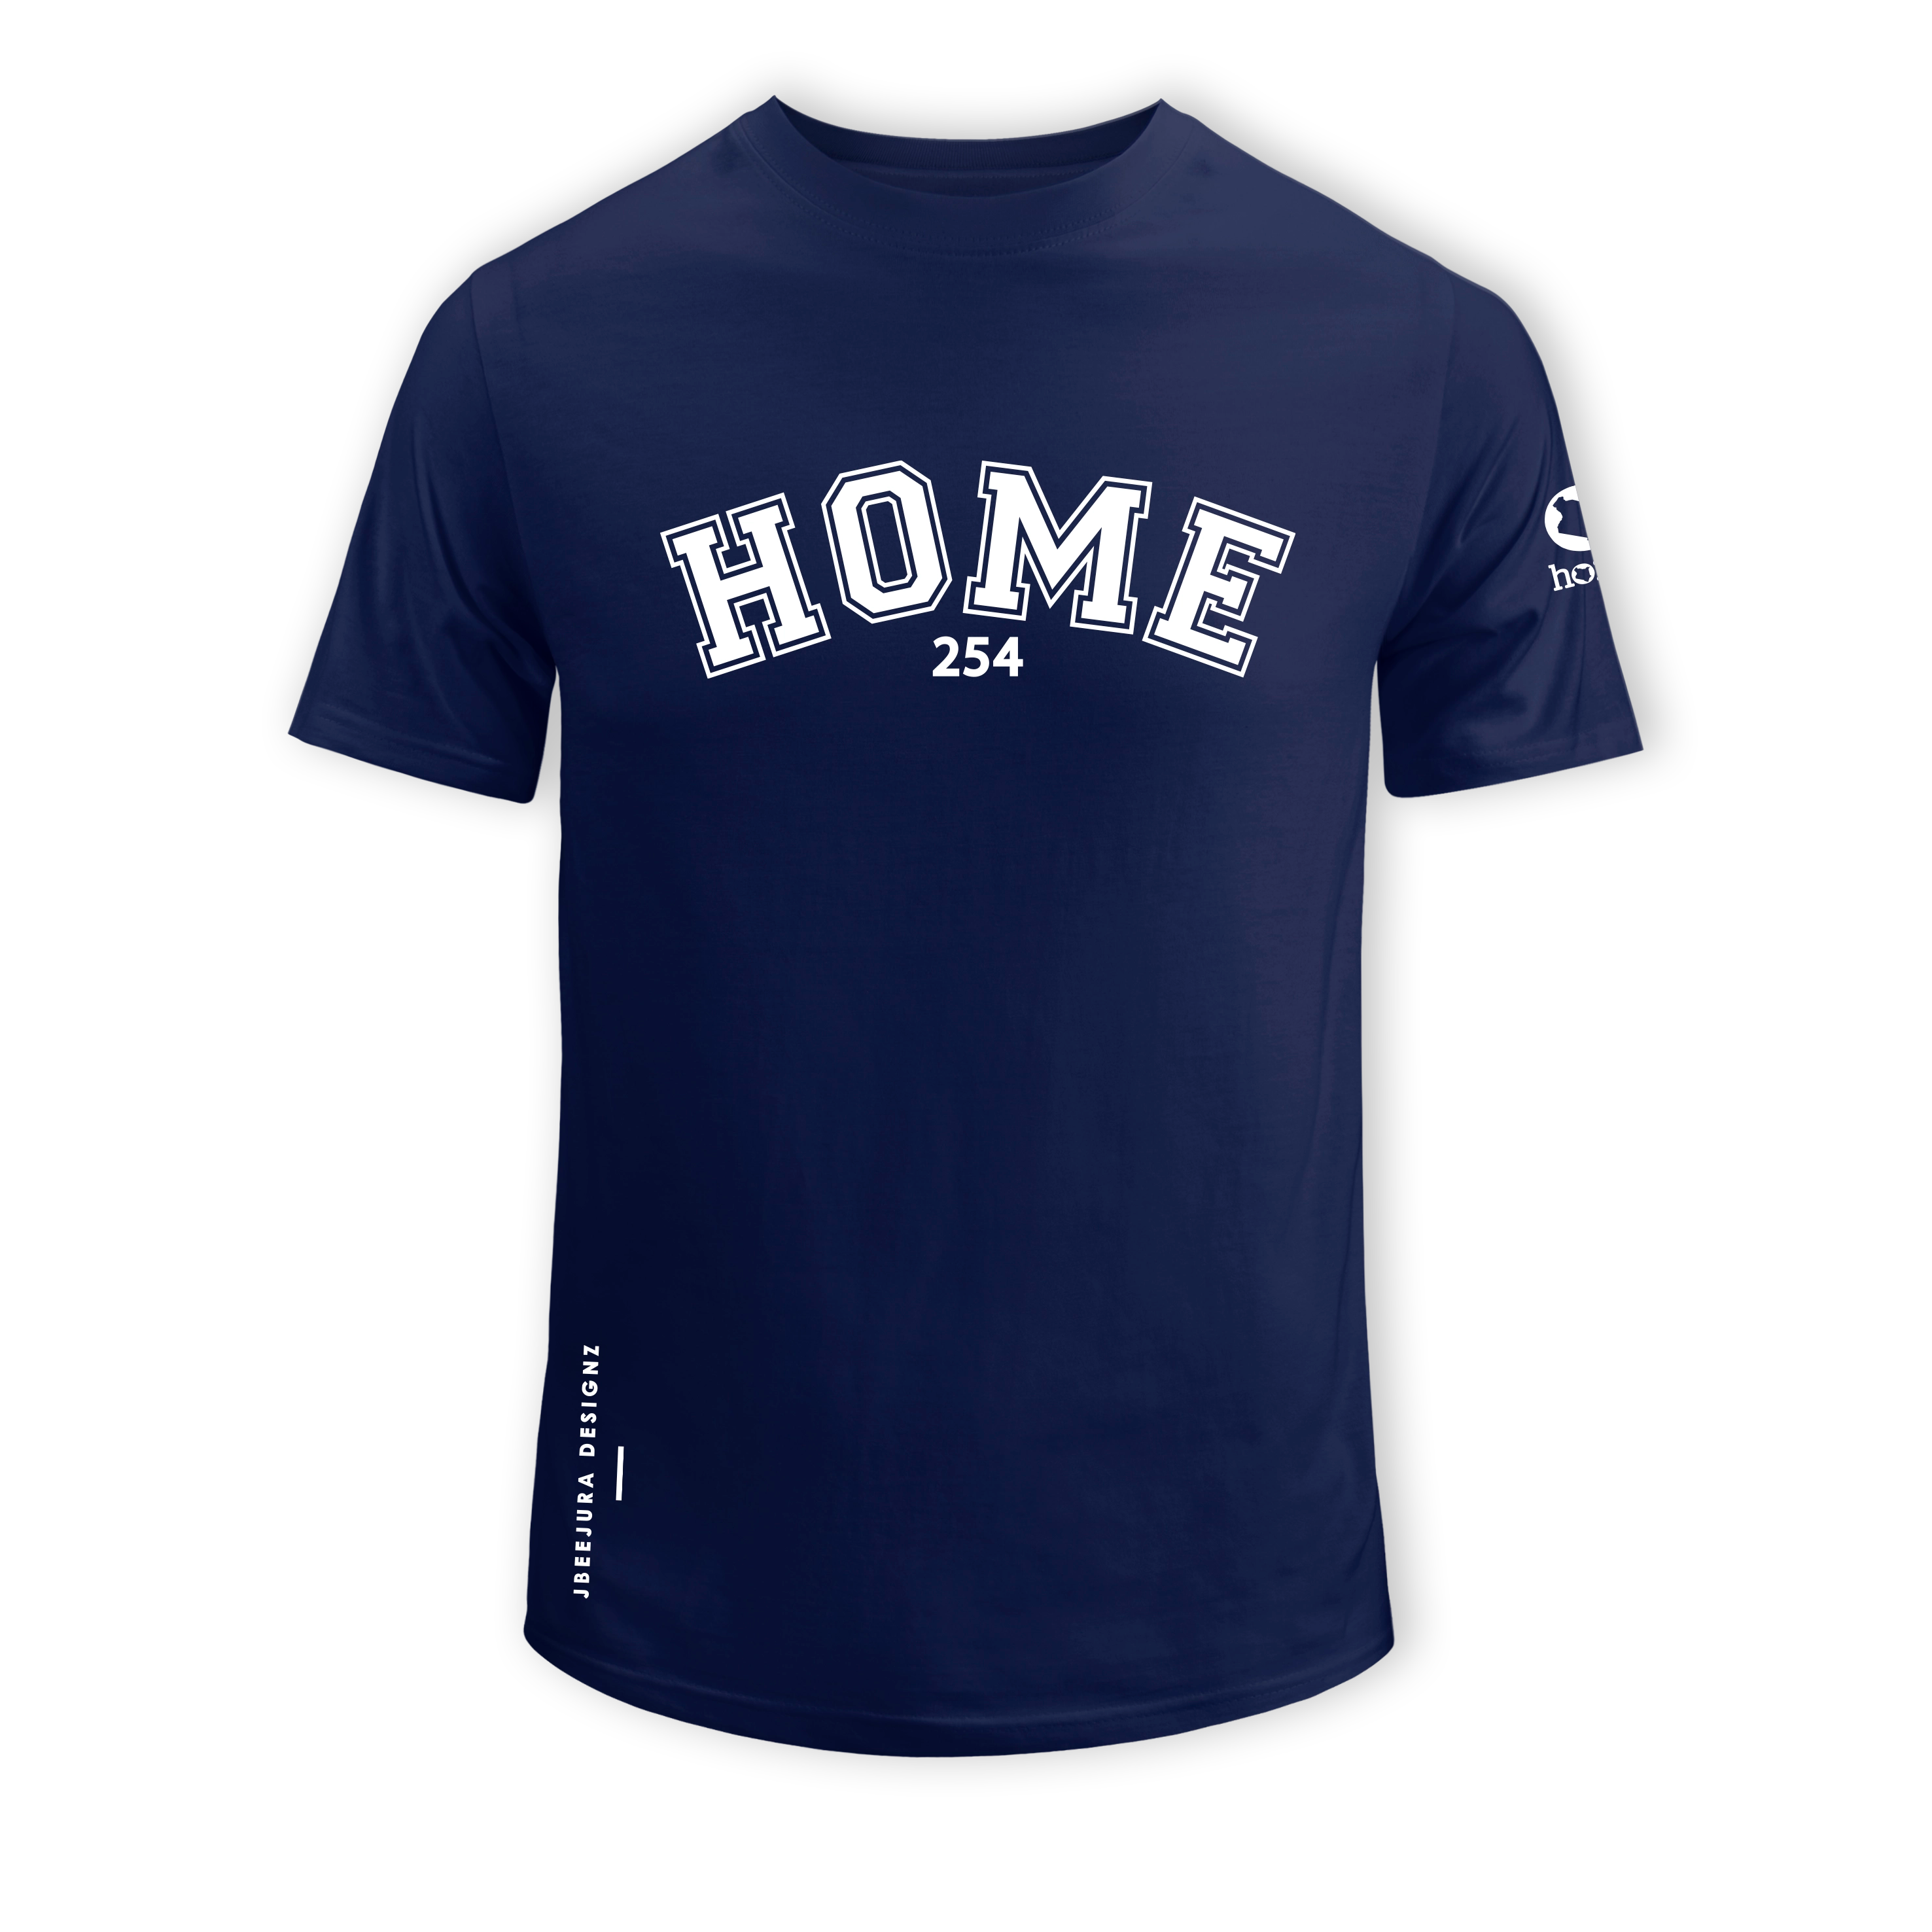 home_254 SHORT-SLEEVED NAVY BLUE T-SHIRT WITH A WHITE COLLEGE PRINT – COTTON PLUS FABRIC